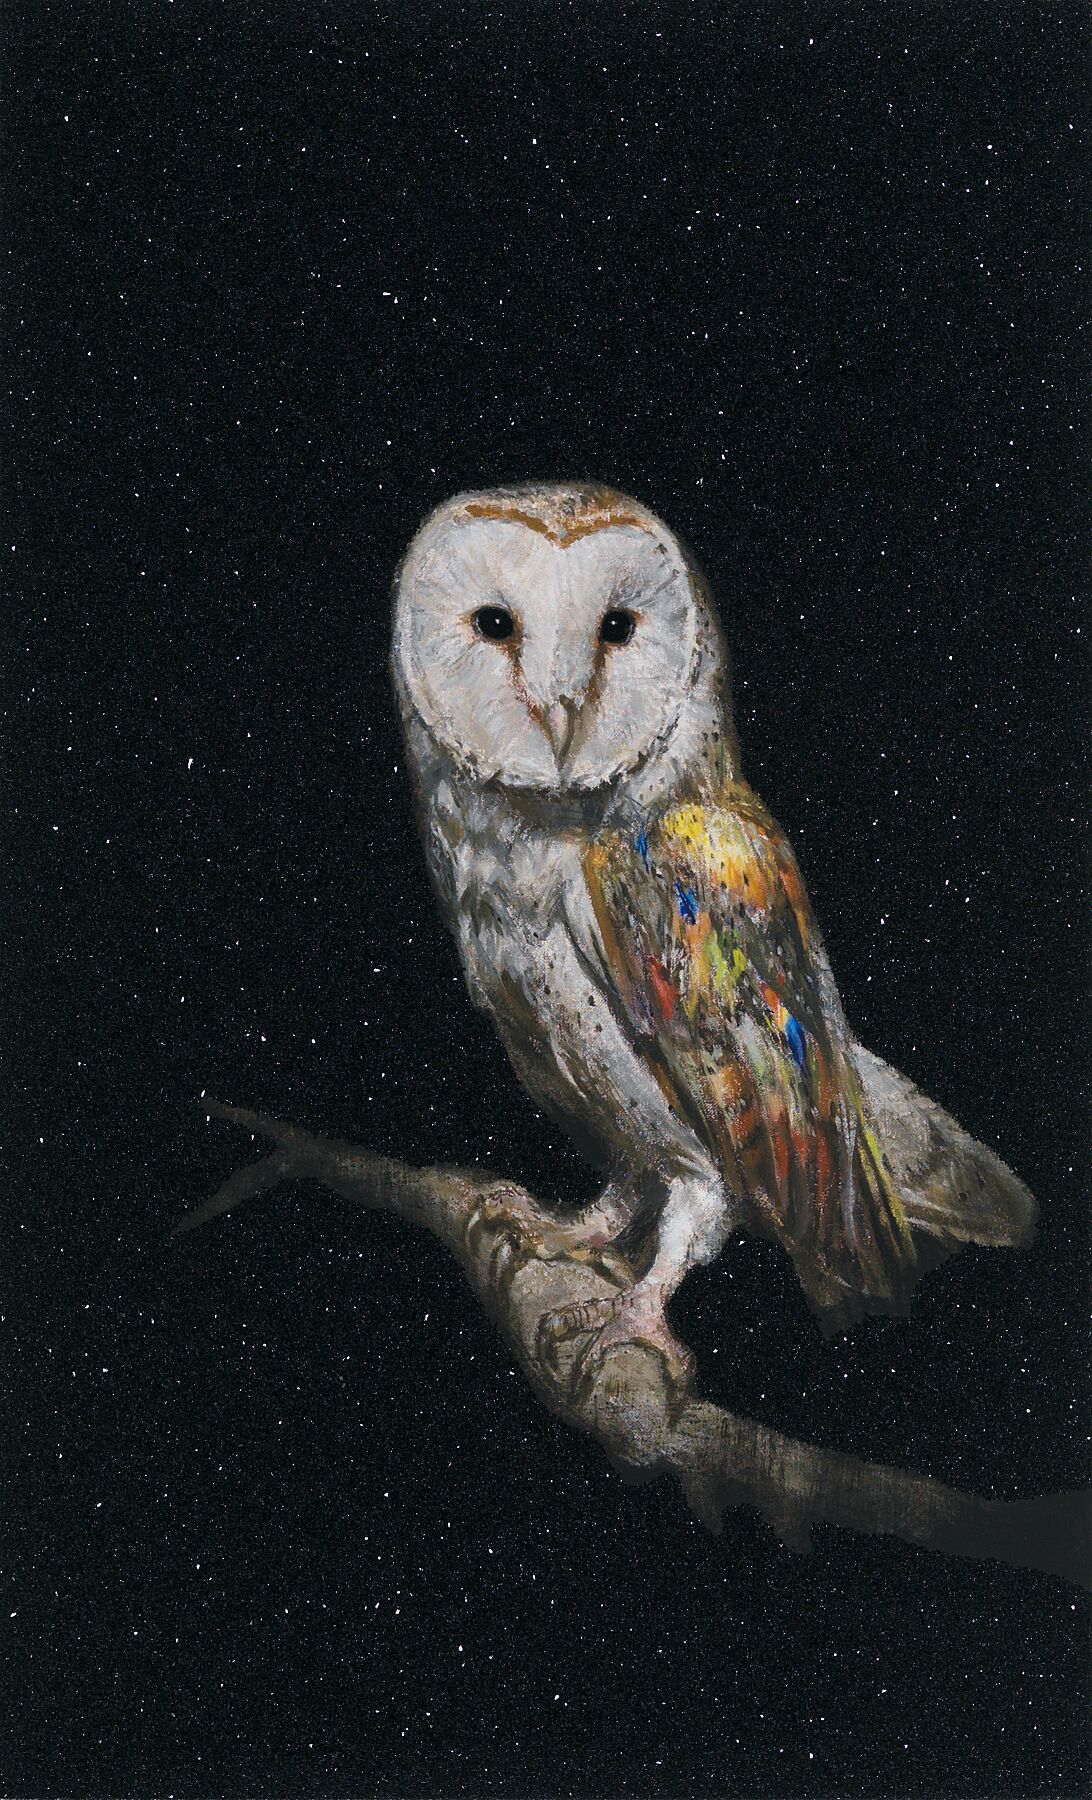 Unframed 'I Saw the Truth - Free as a Bird' by Christian Furr. This captivating print features an owl with a brightly coloured wing, poised against a backdrop of a stunning black starry night sky. 